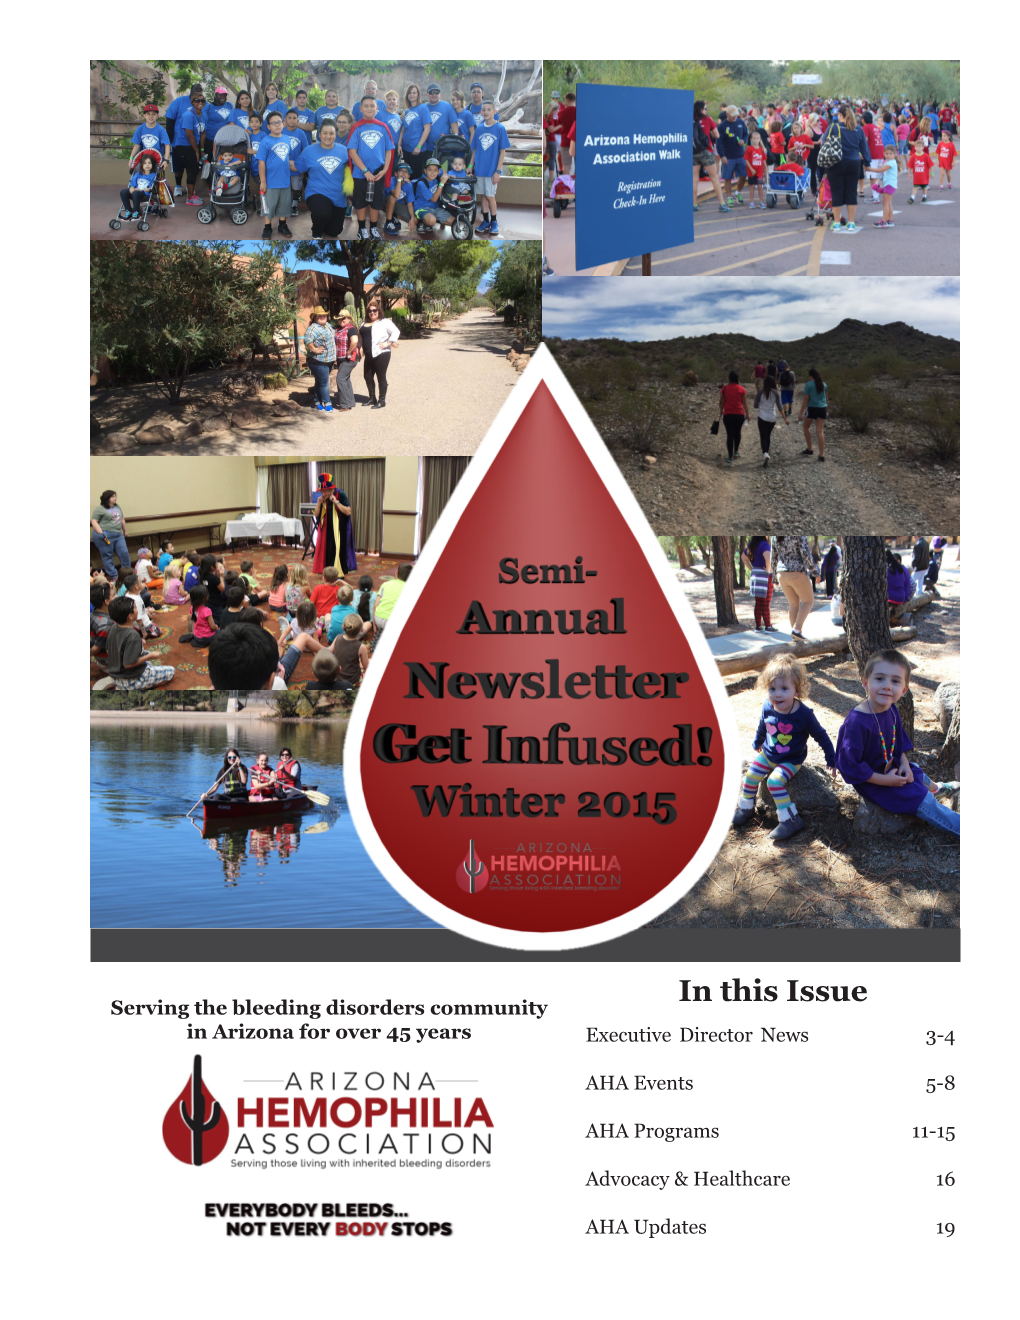 In This Issue Serving the Bleeding Disorders Community in Arizona for Over 45 Years Executive Director News 3-4